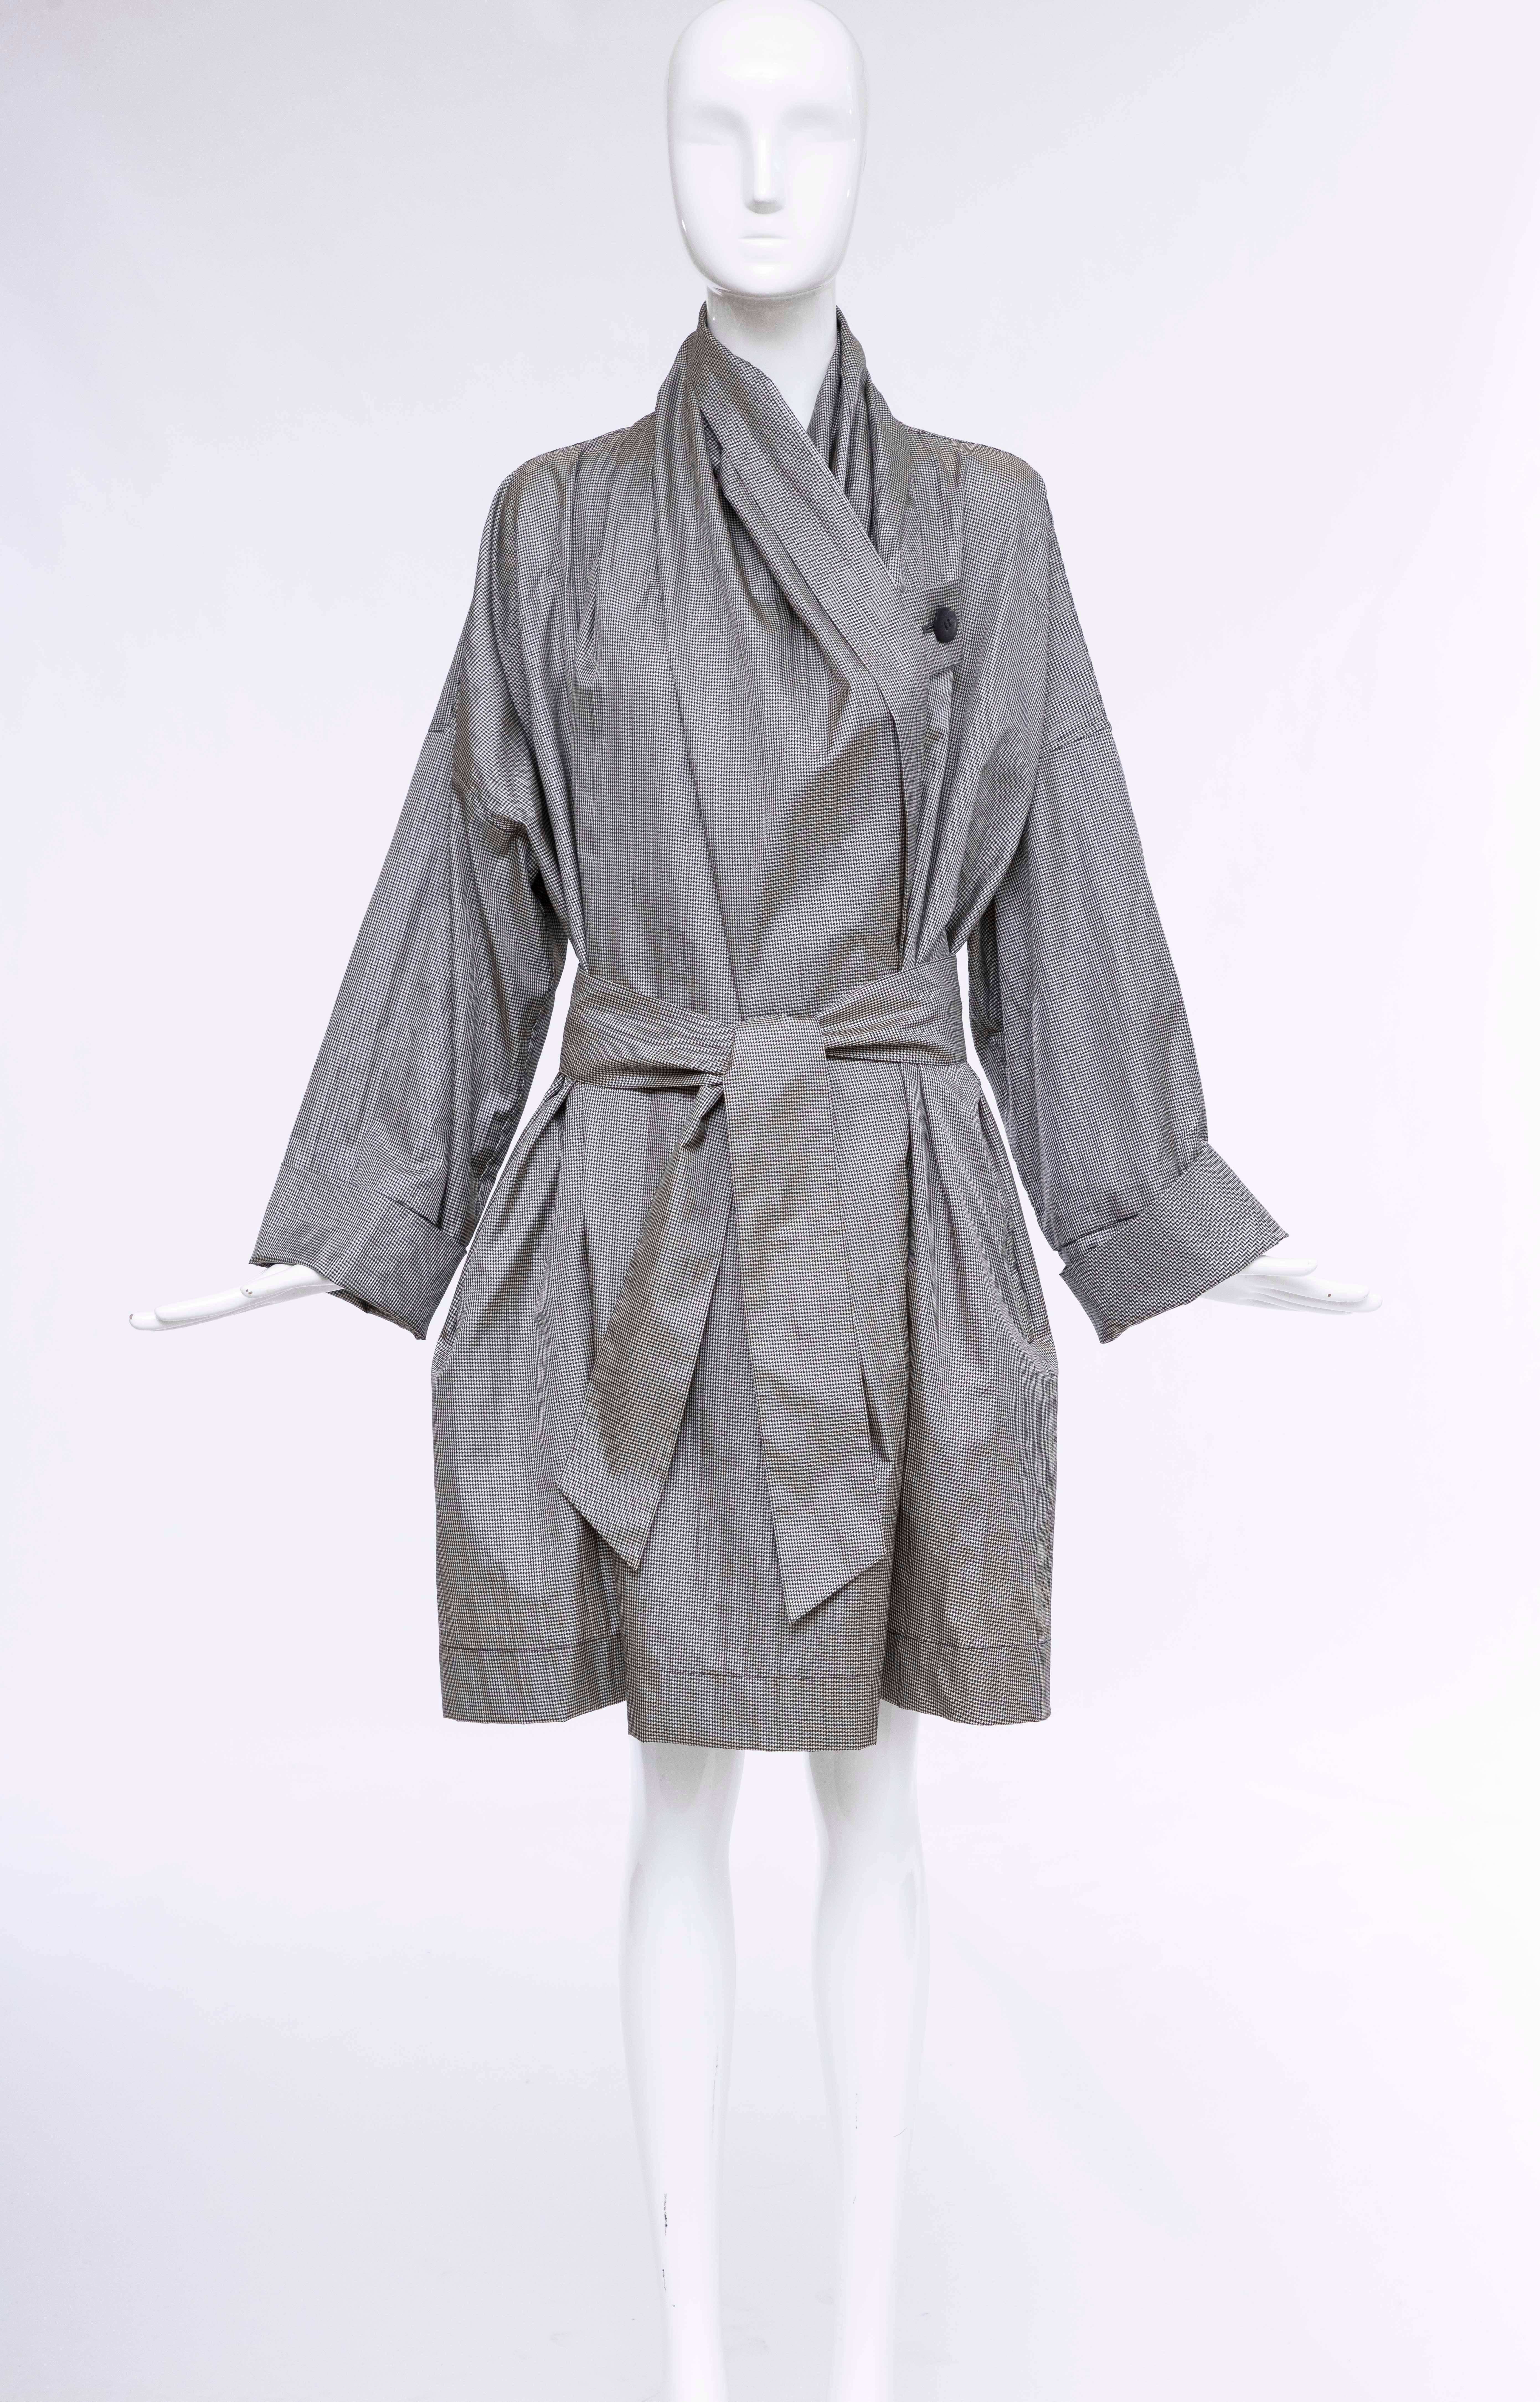  Issey Miyake, Circa: 1985 layered houndstooth nylon trench coat with asymmetrical draping throughout, tonal insert at interior bodice, shawl lapels, dual welt pockets at sides, gathered nape, tonal sash tie at waist and contrasting button closures